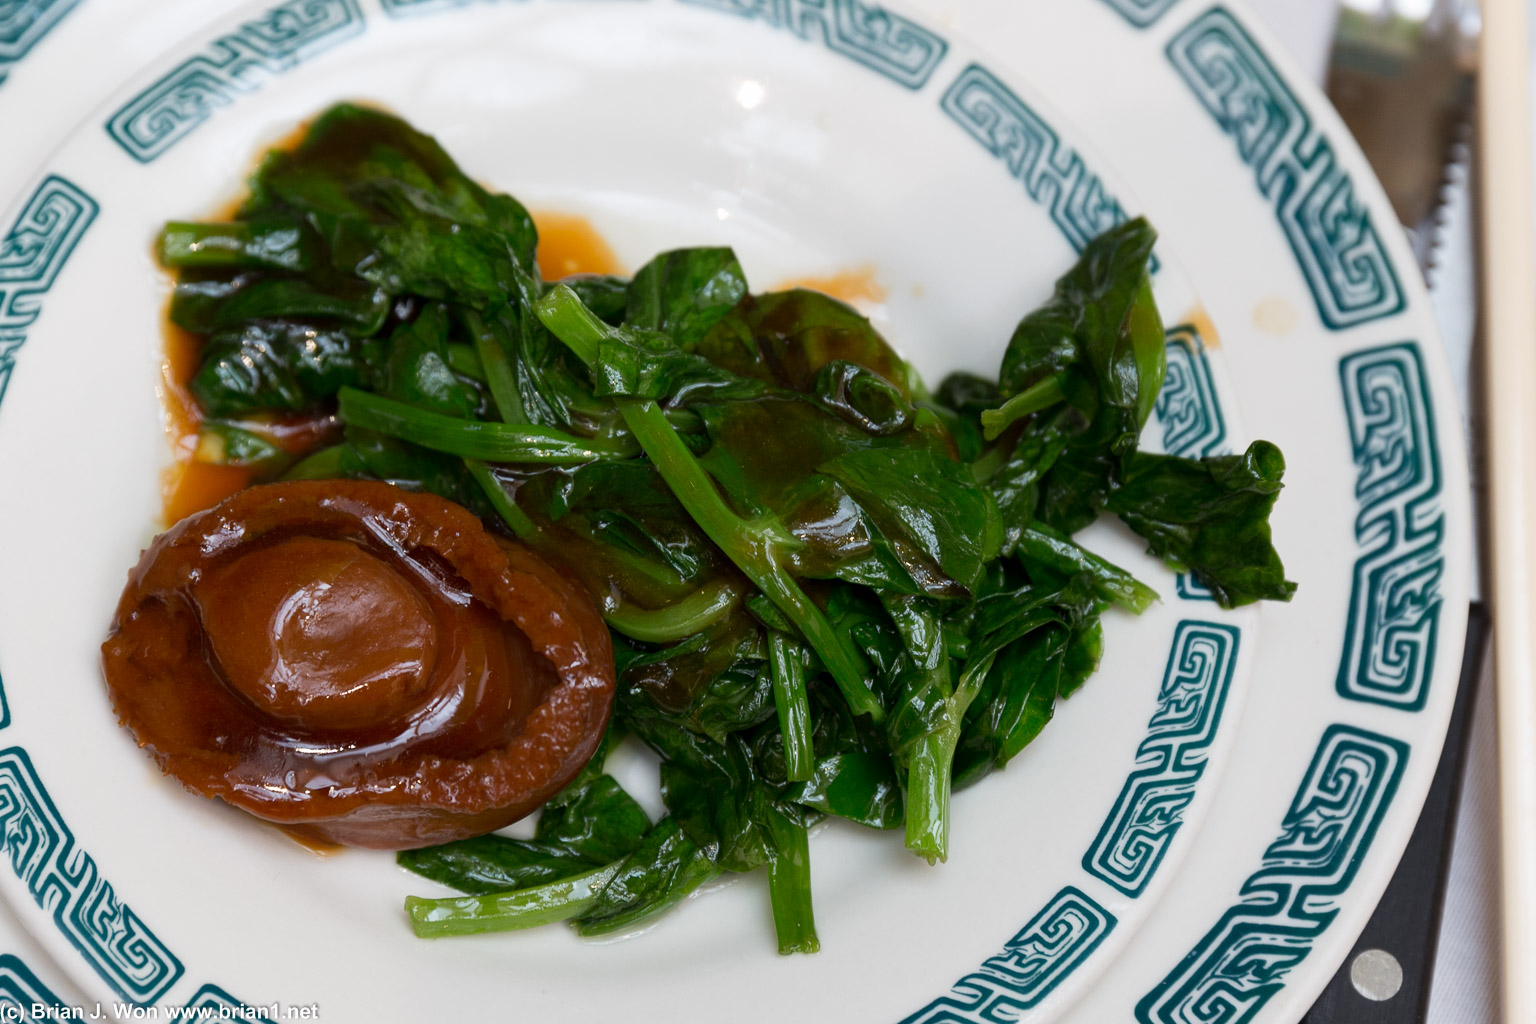 Spinach and abalone. Some of the best abalone I've had in the USA.